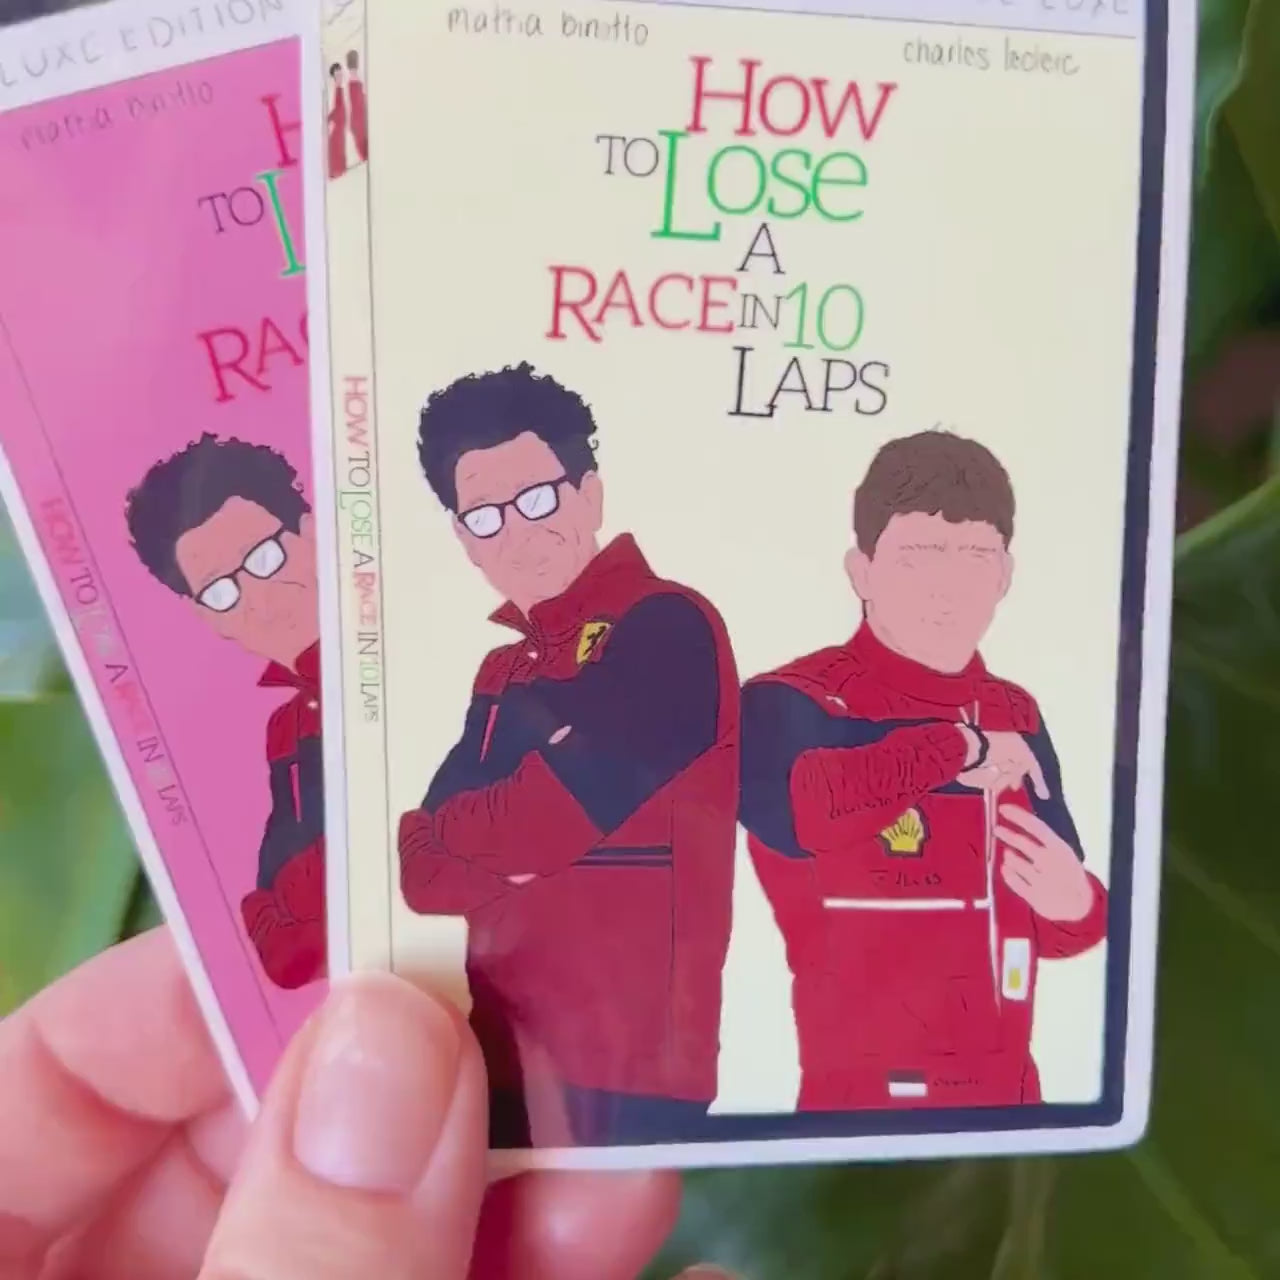 How To Lose A Race In 10 Laps sticker